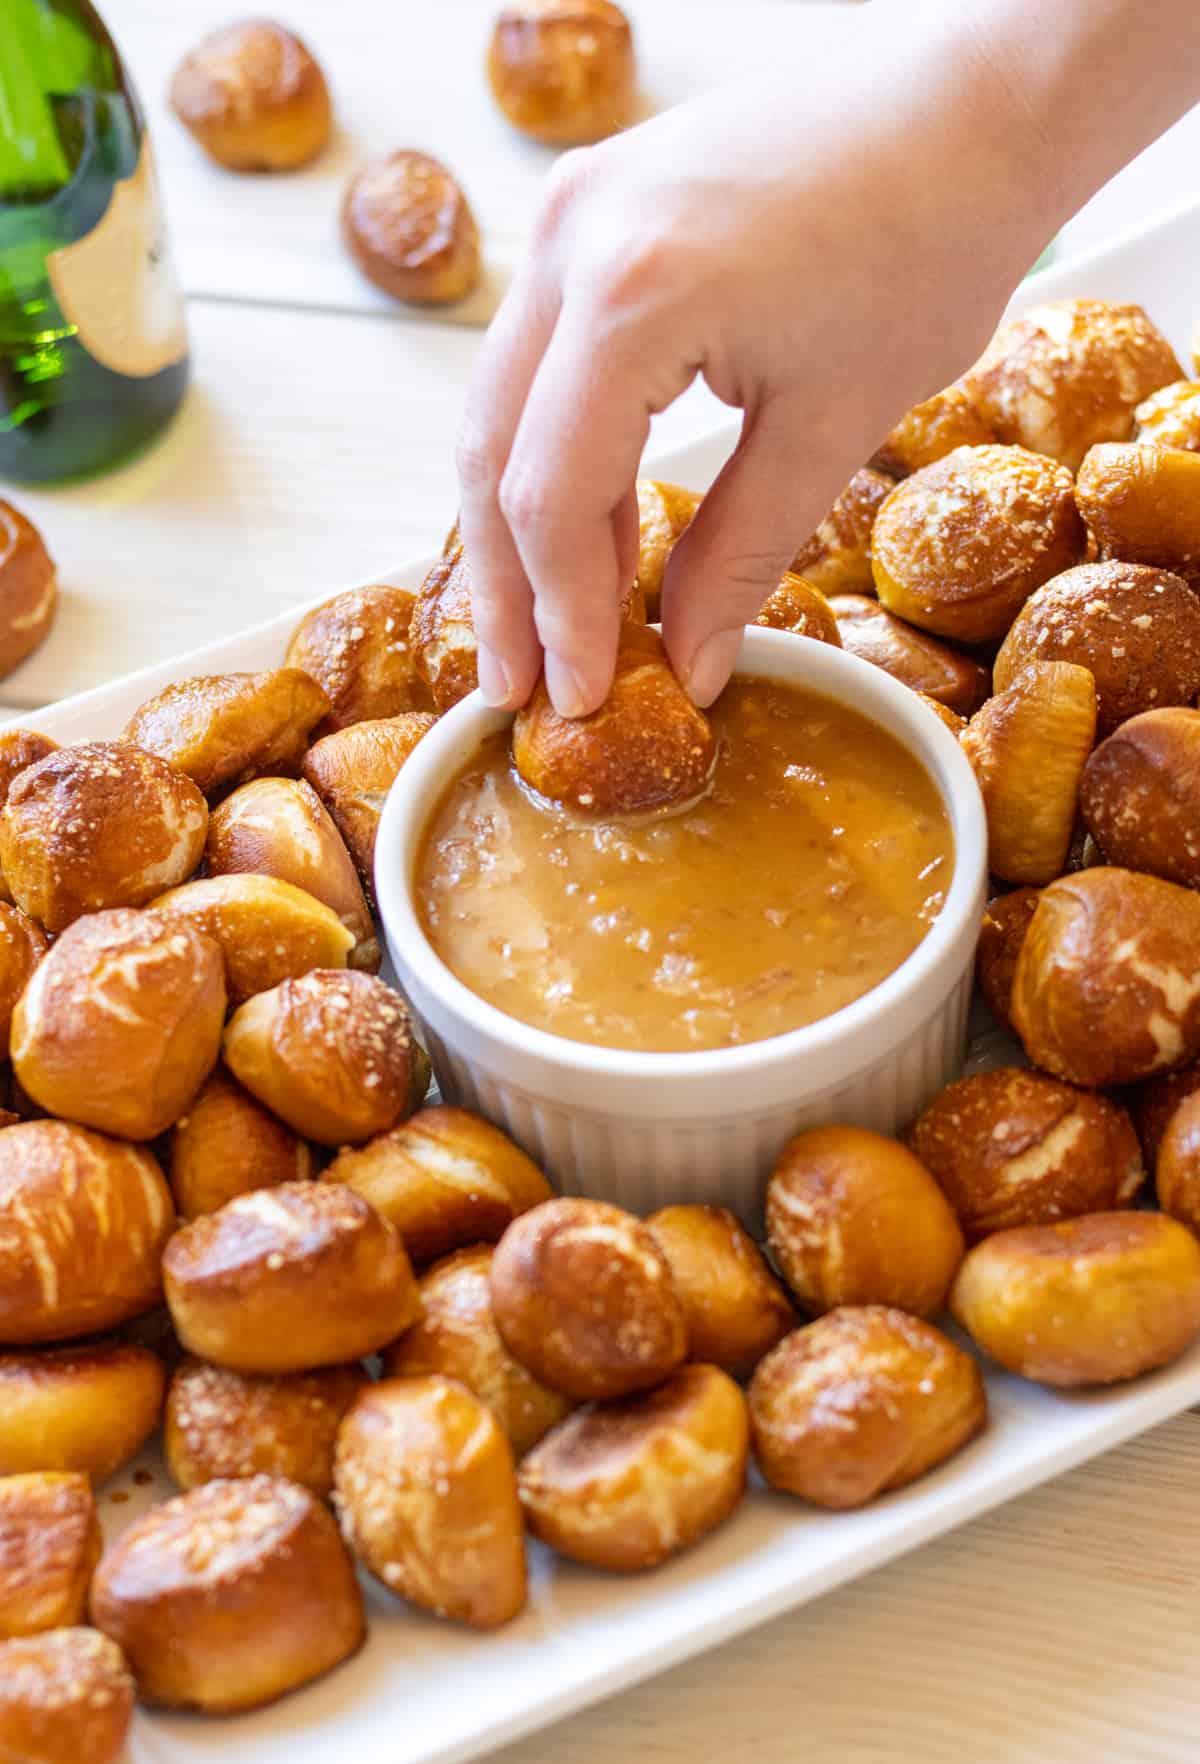 Pretzel bites on a tray with the honey mustard dip in a bowl with a hand dunking one of the pieces in the dip.